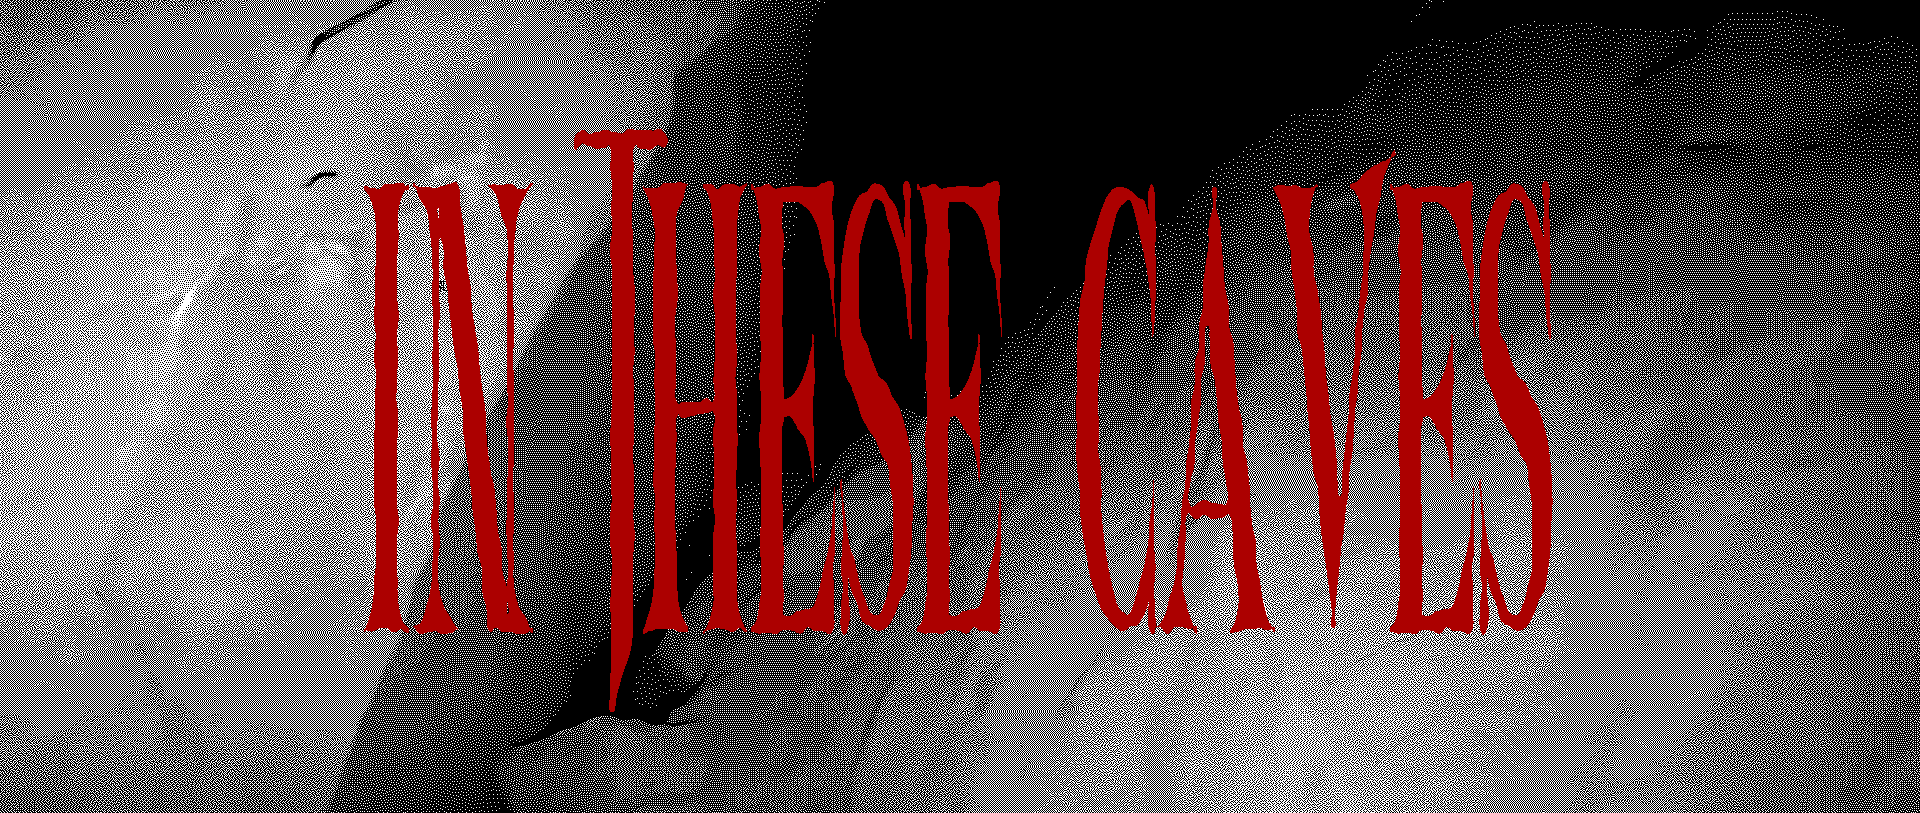 In These Caves: DEMO